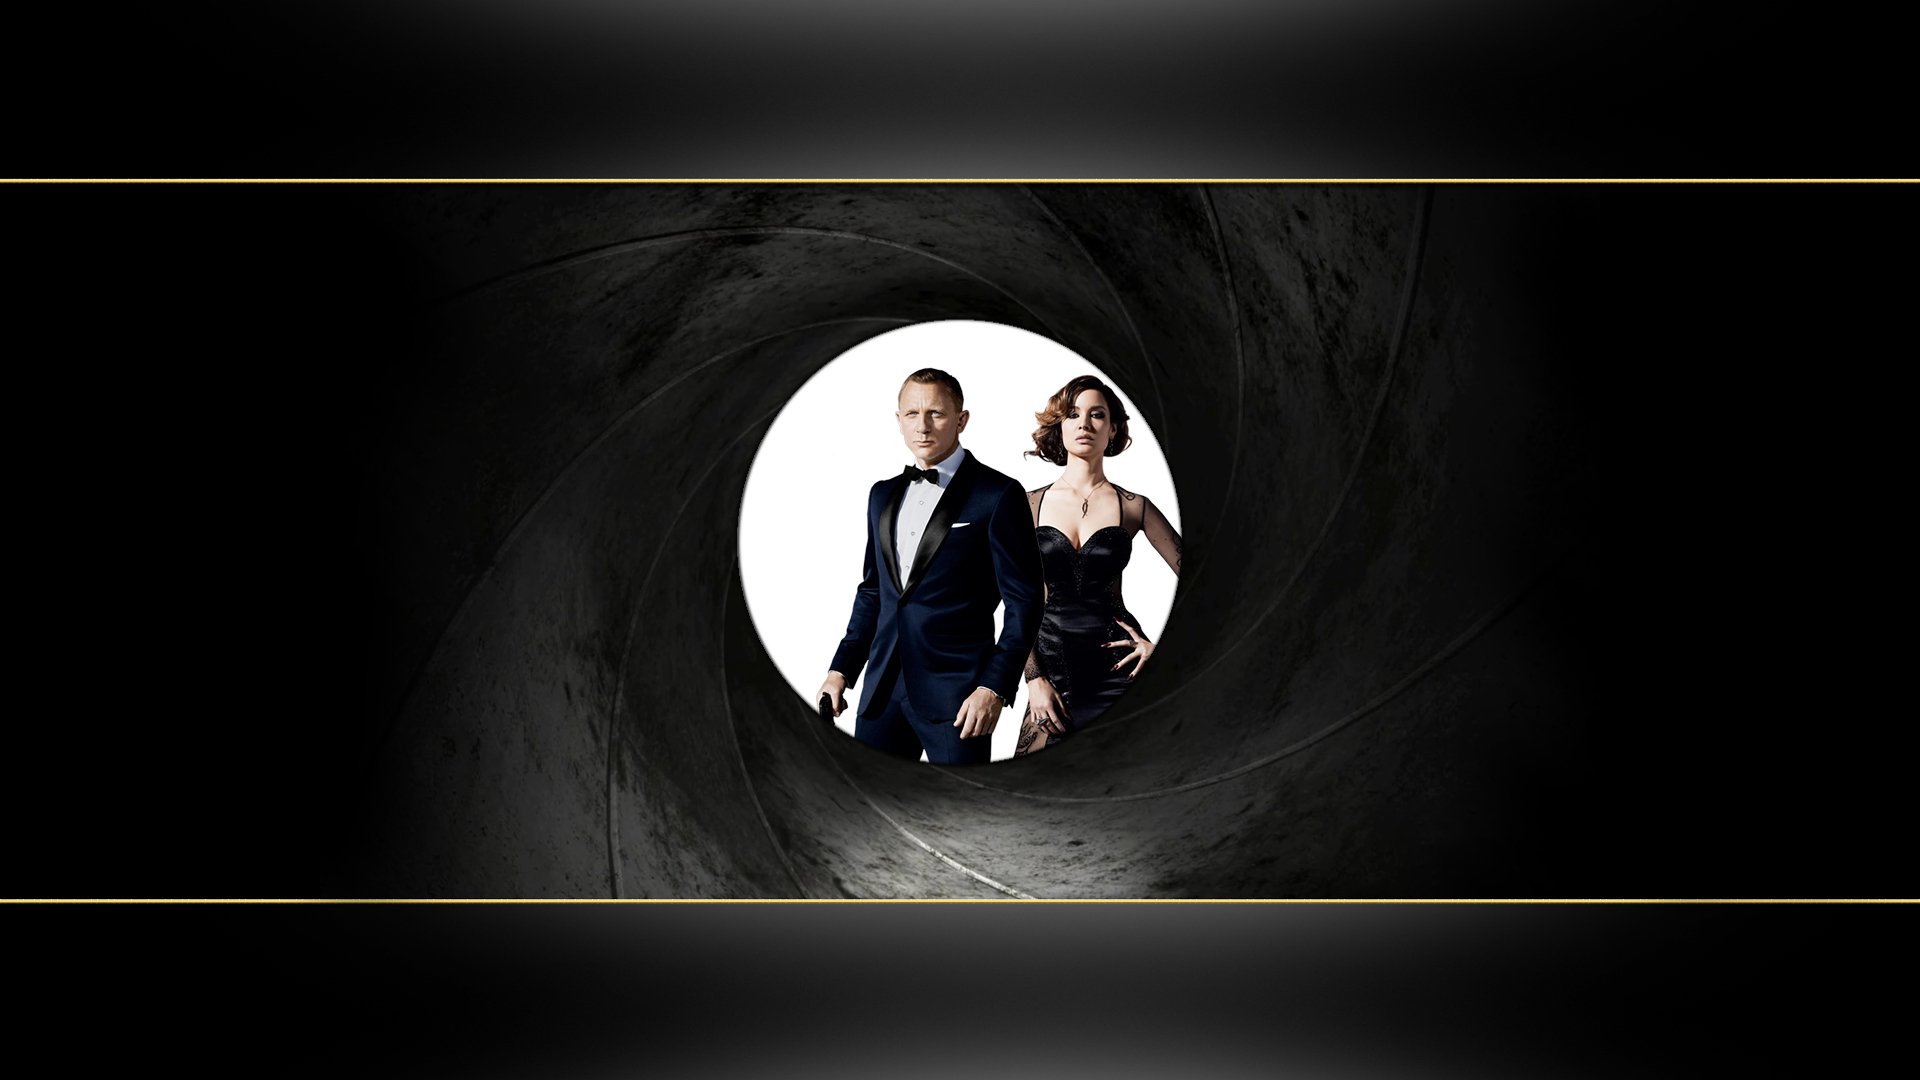 Skyfall download the last version for mac